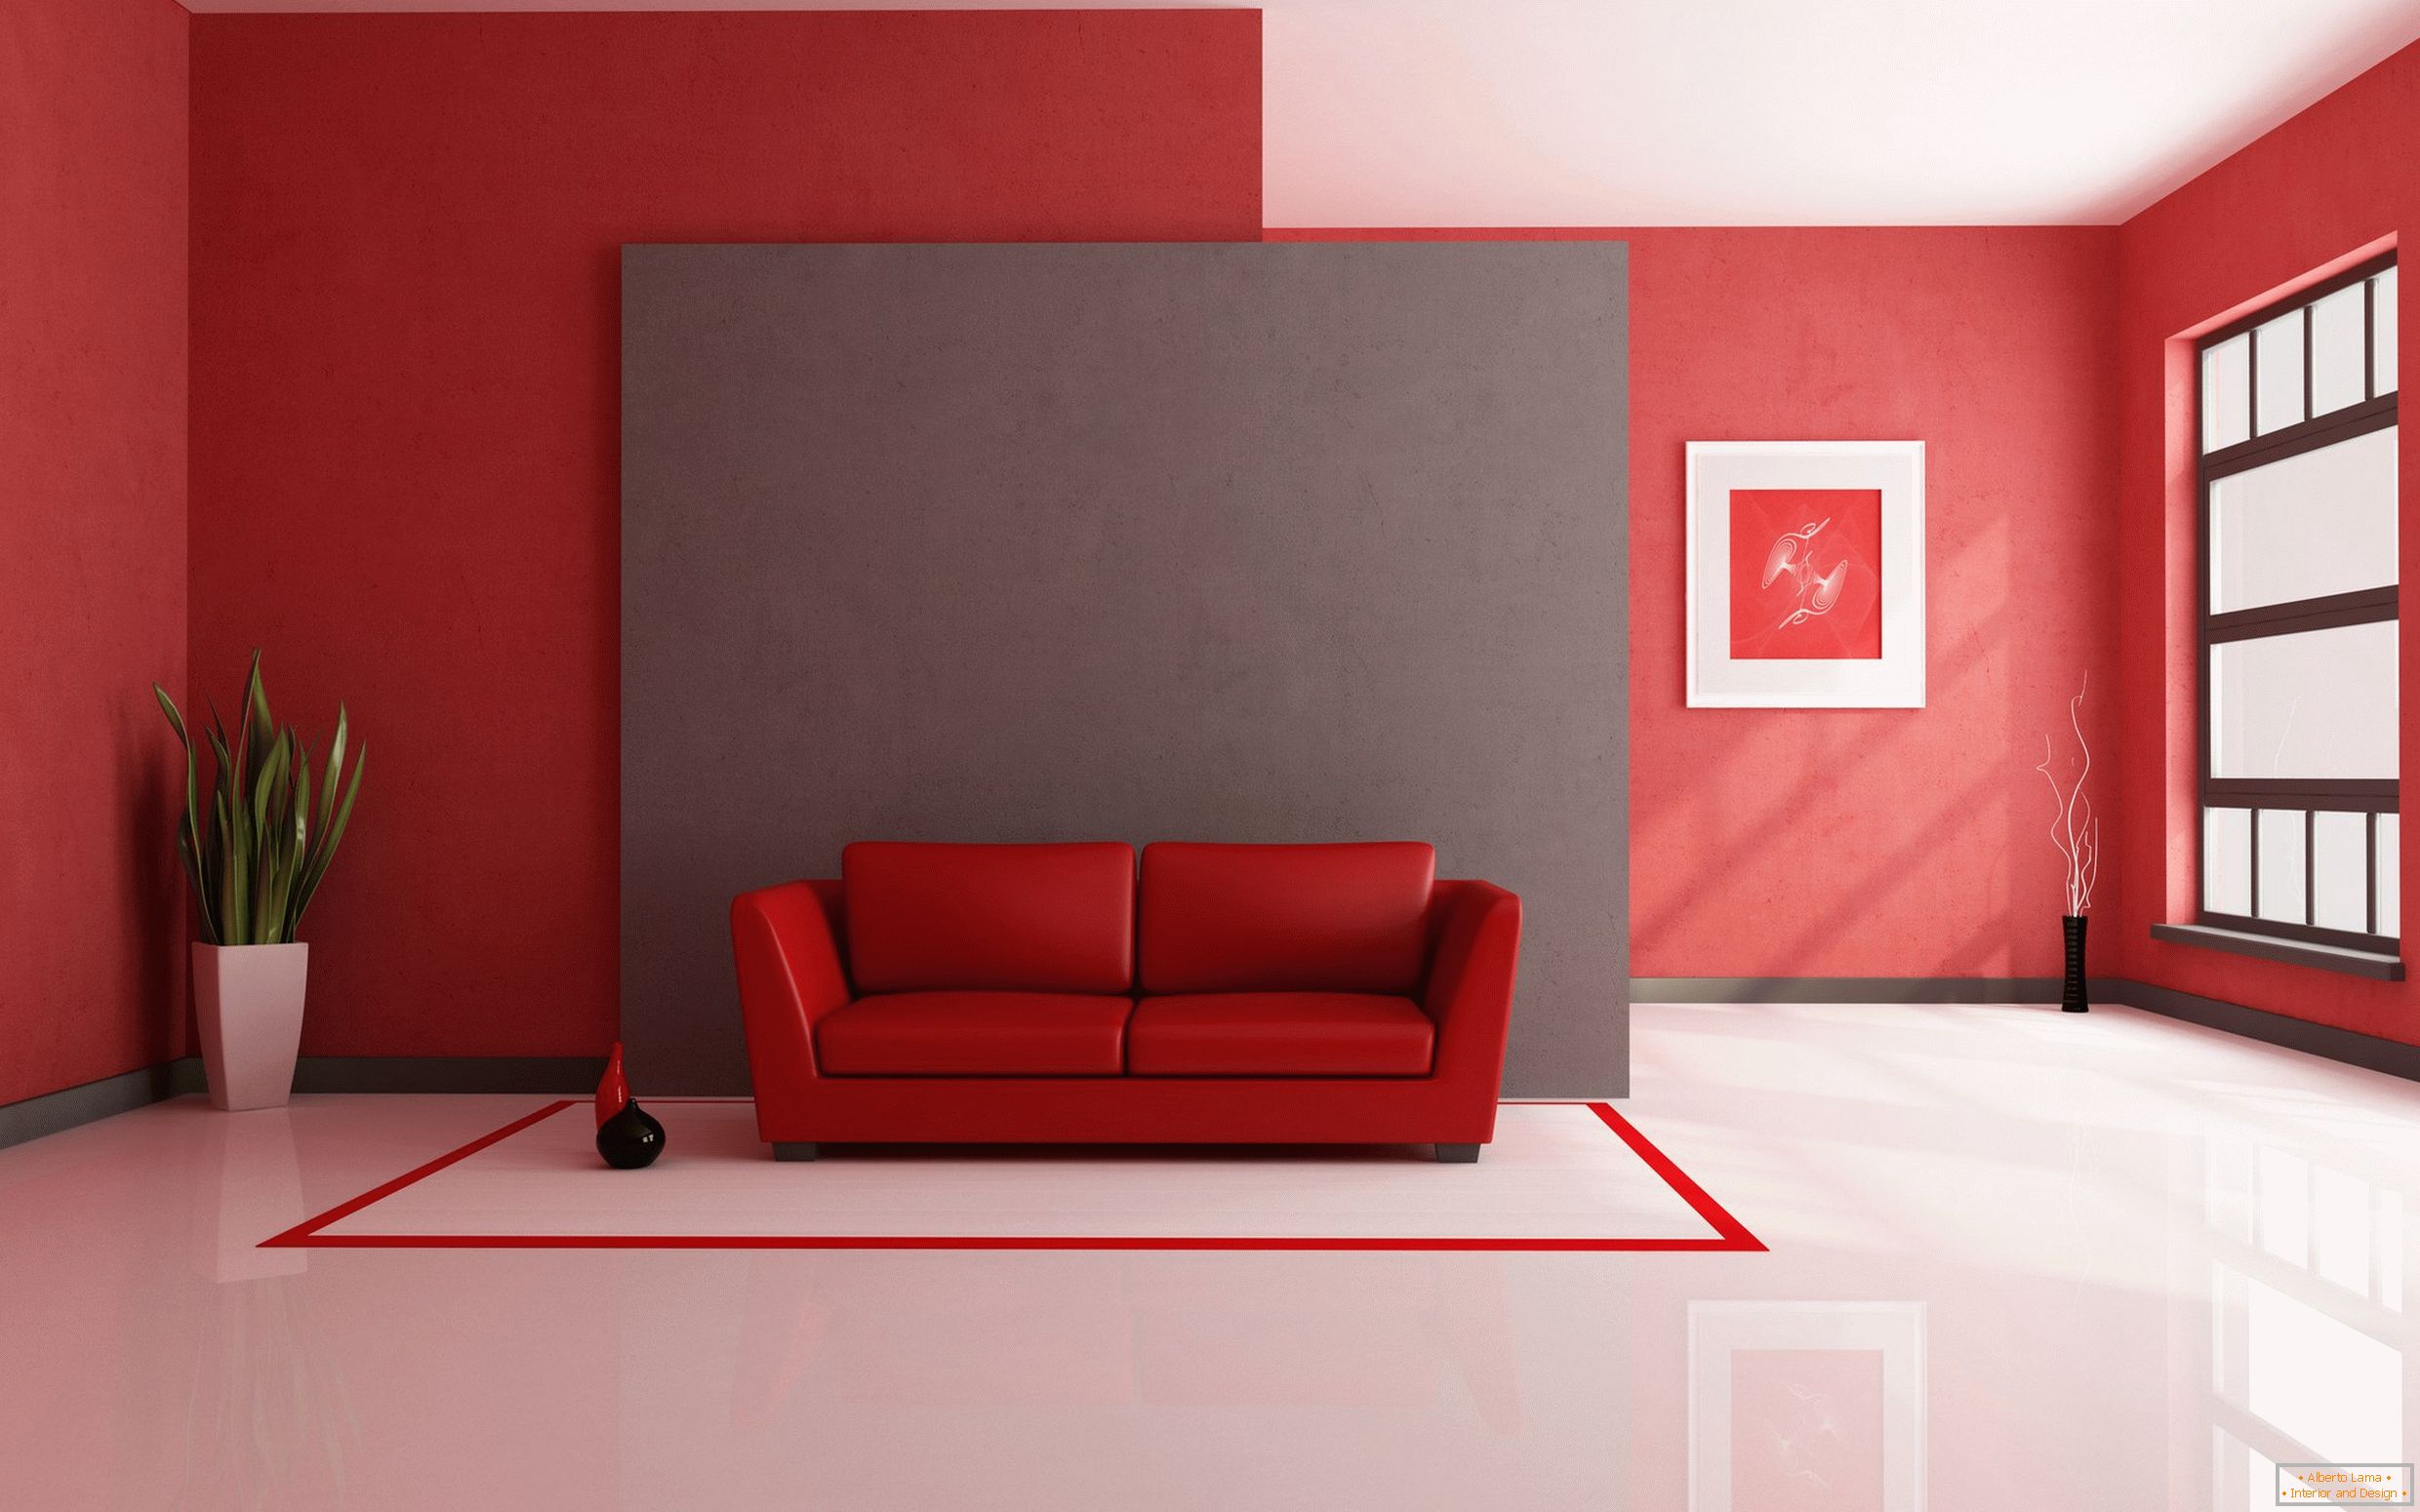 Red walls in the interior